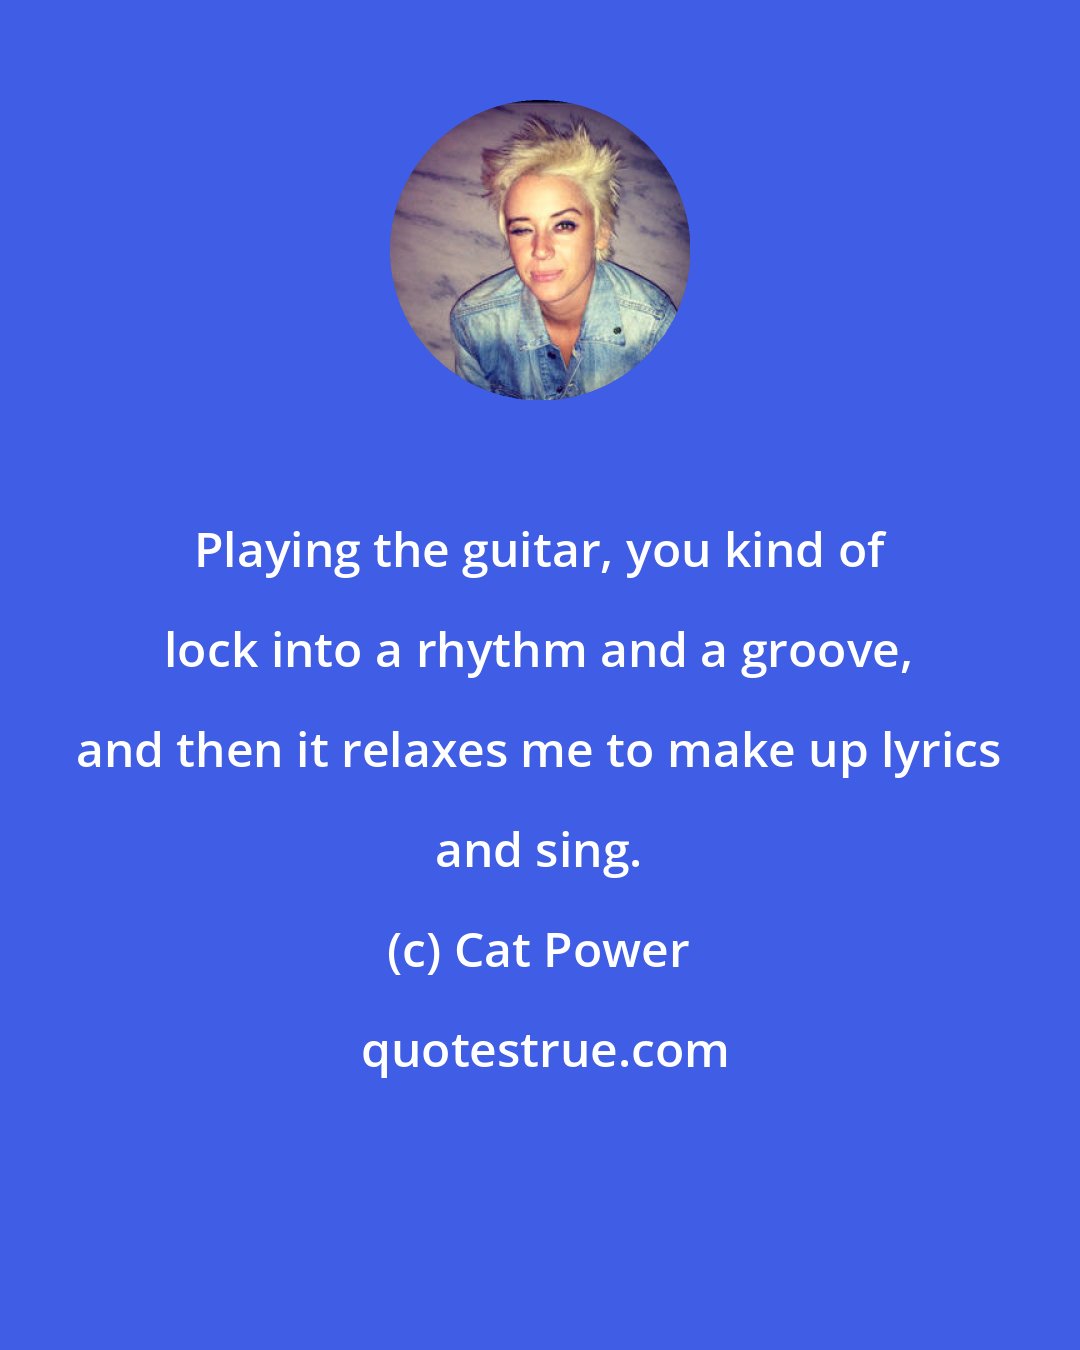 Cat Power: Playing the guitar, you kind of lock into a rhythm and a groove, and then it relaxes me to make up lyrics and sing.